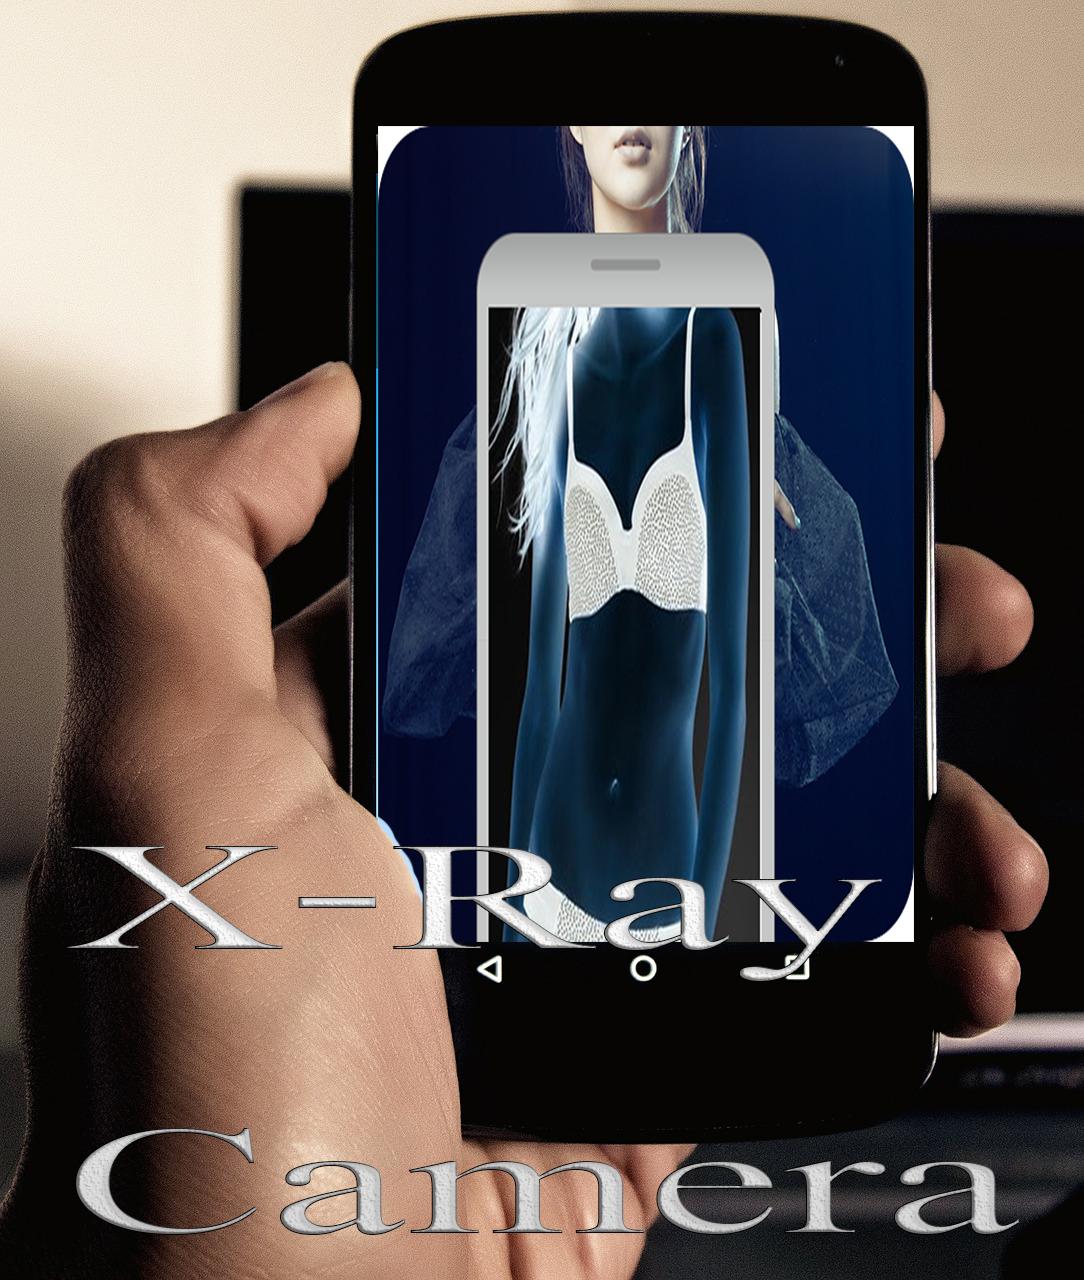 X-Ray Ropa interior broma. for Android - APK Download